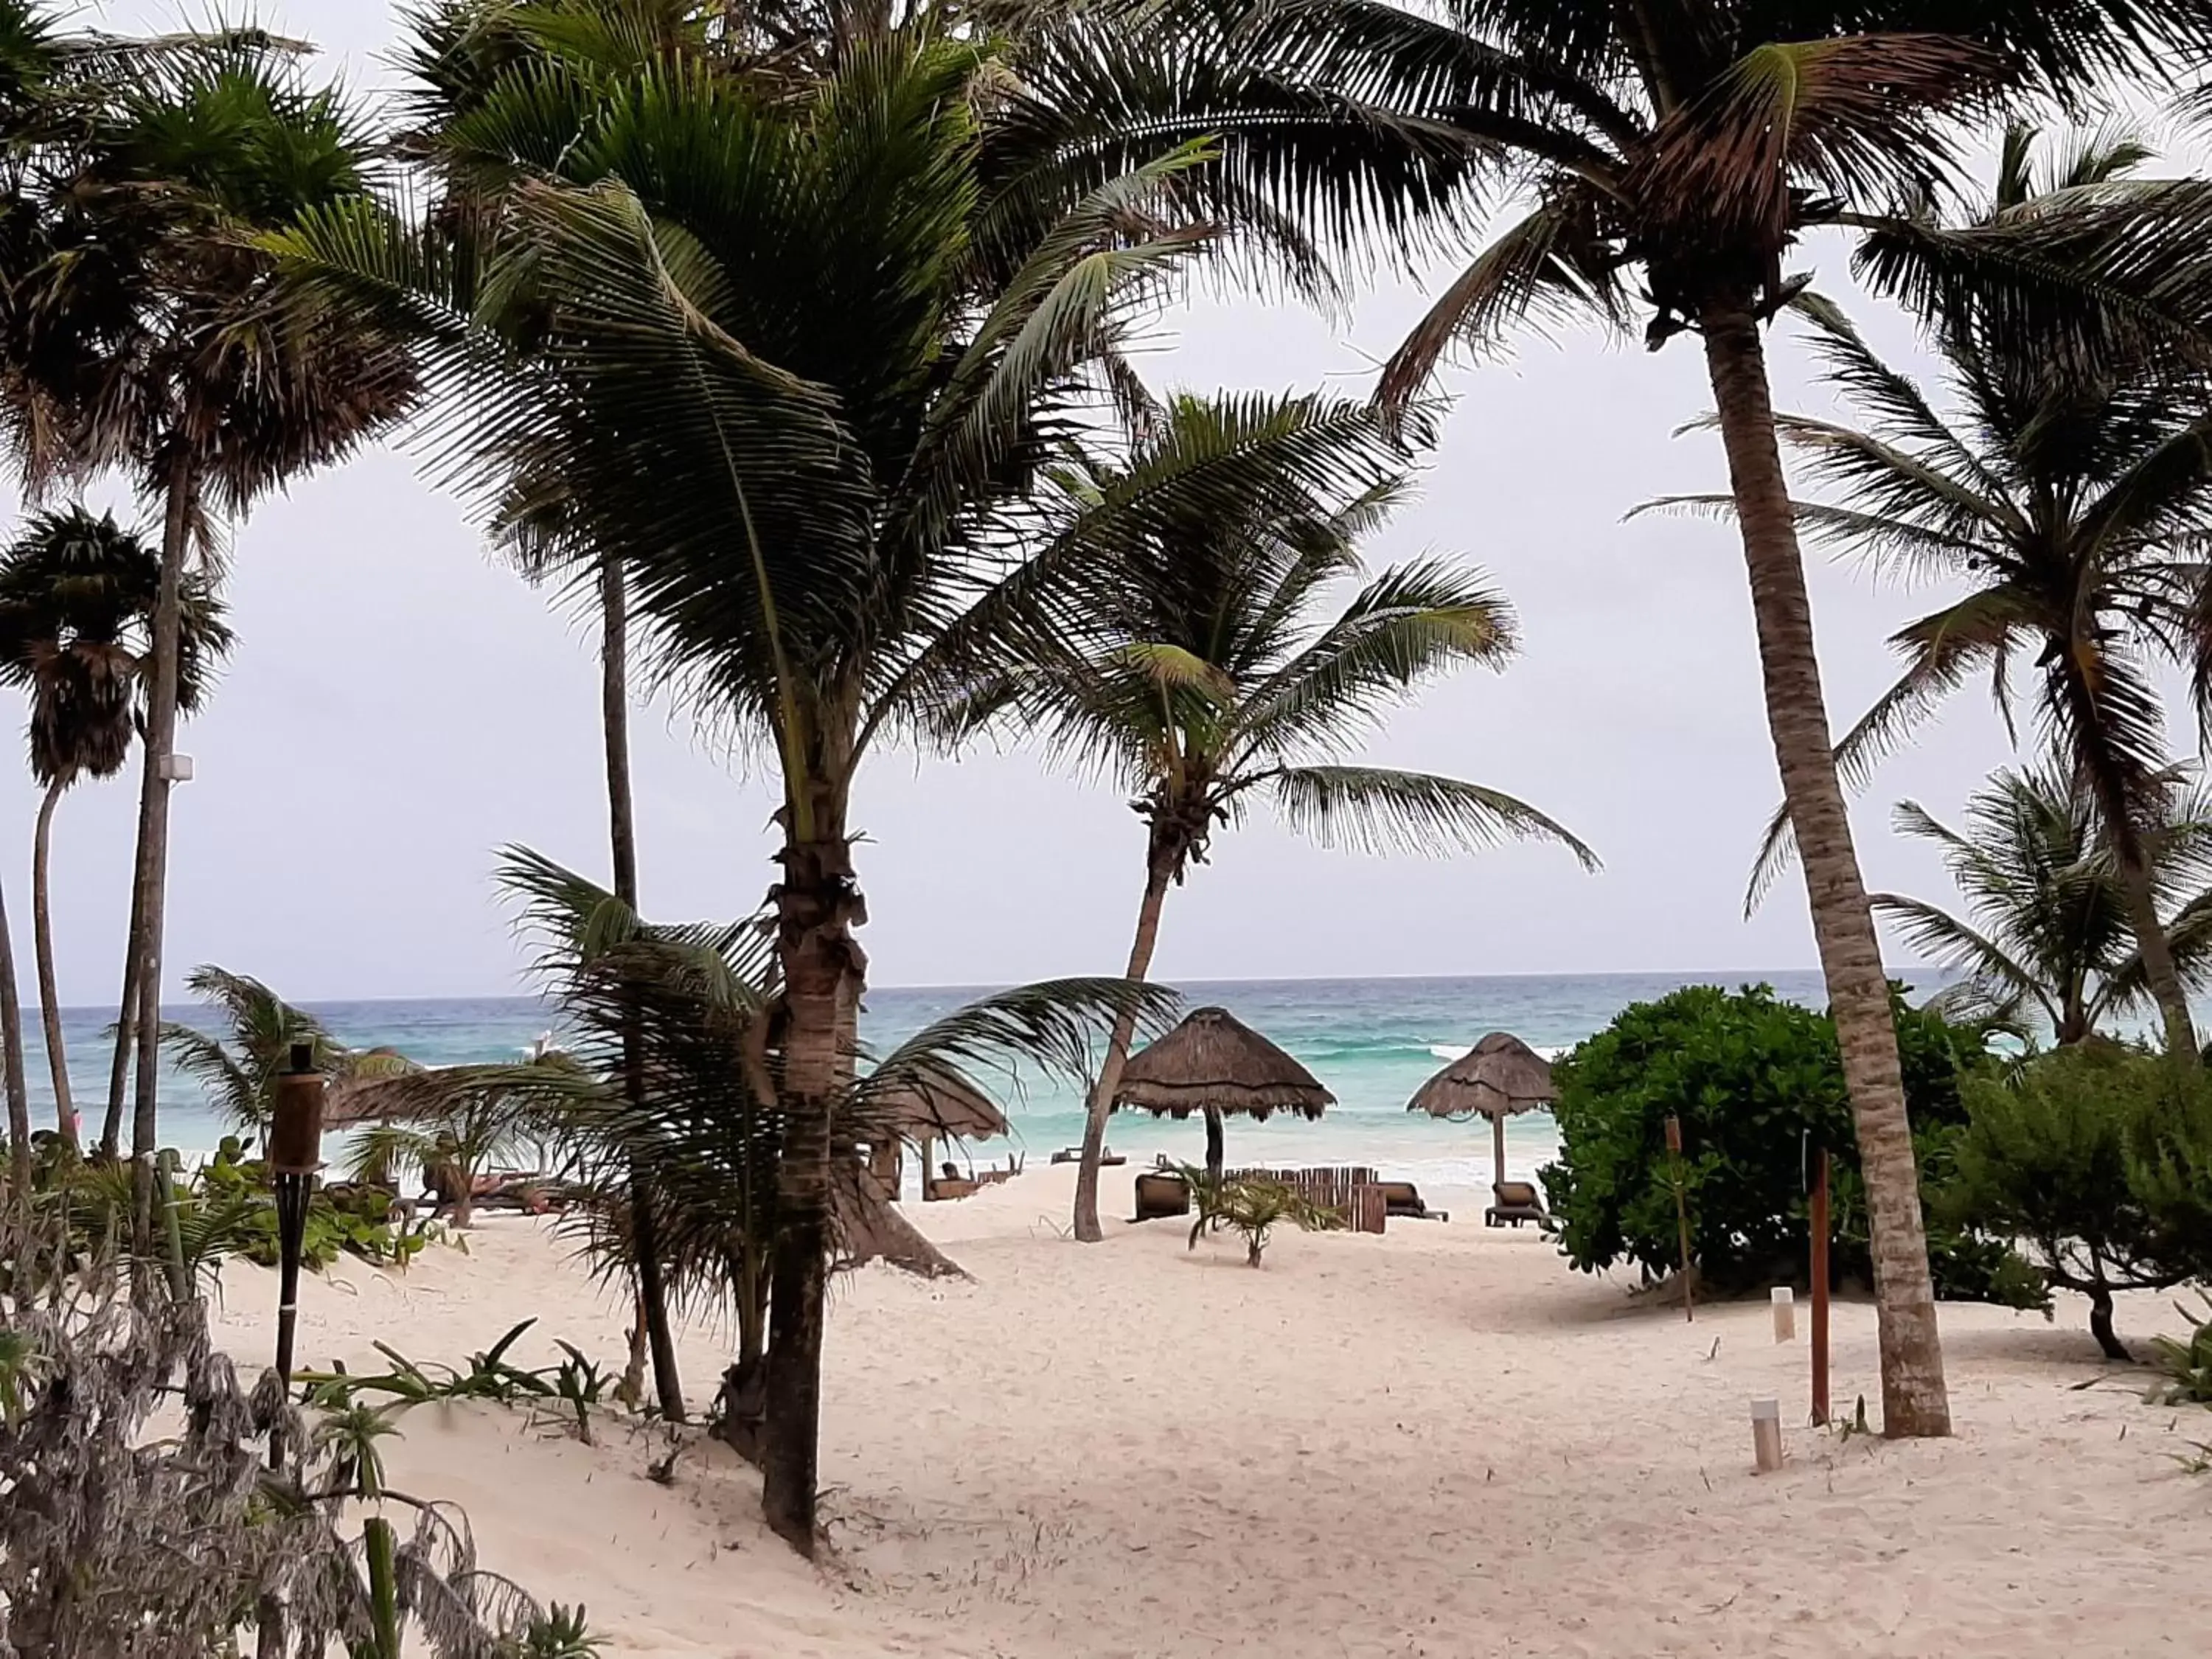 Beach in BT Live Tulum located at the party zone